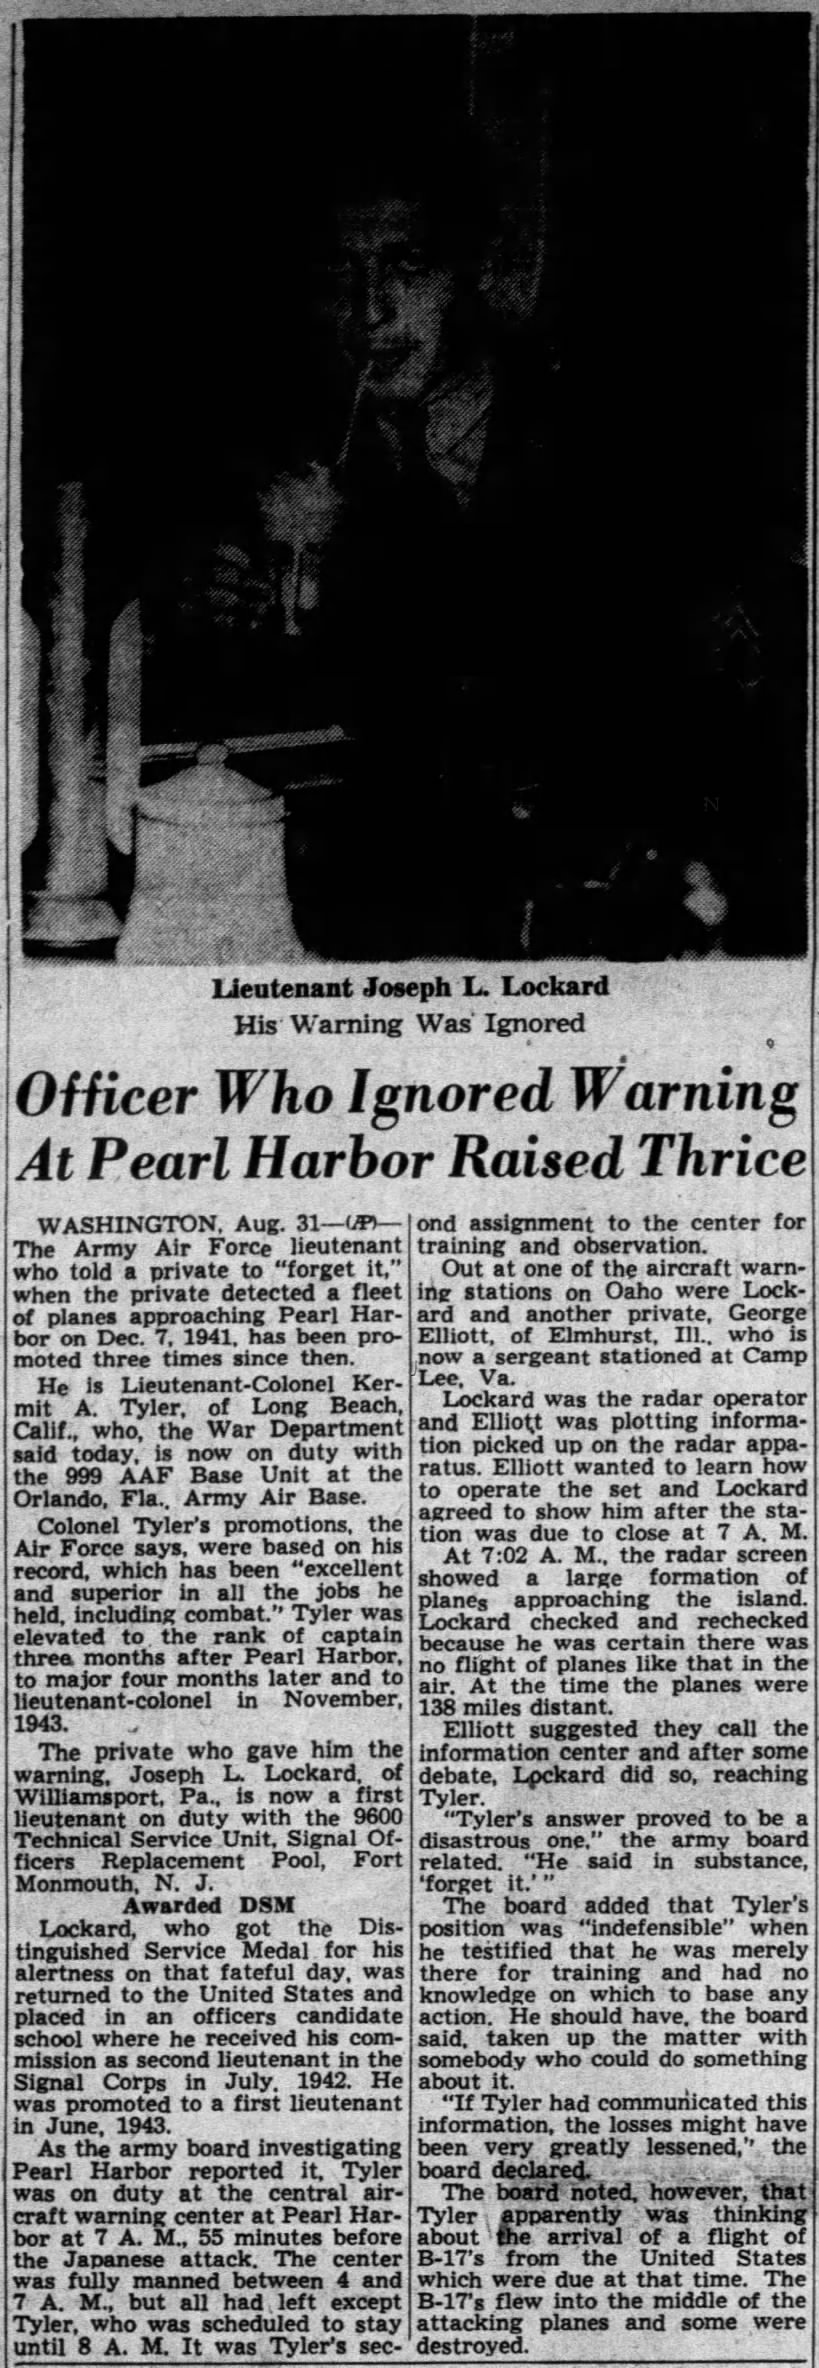 Pvt. Lockhard saw planes on radar before Pearl Harbor attack, ignored as American B-17s